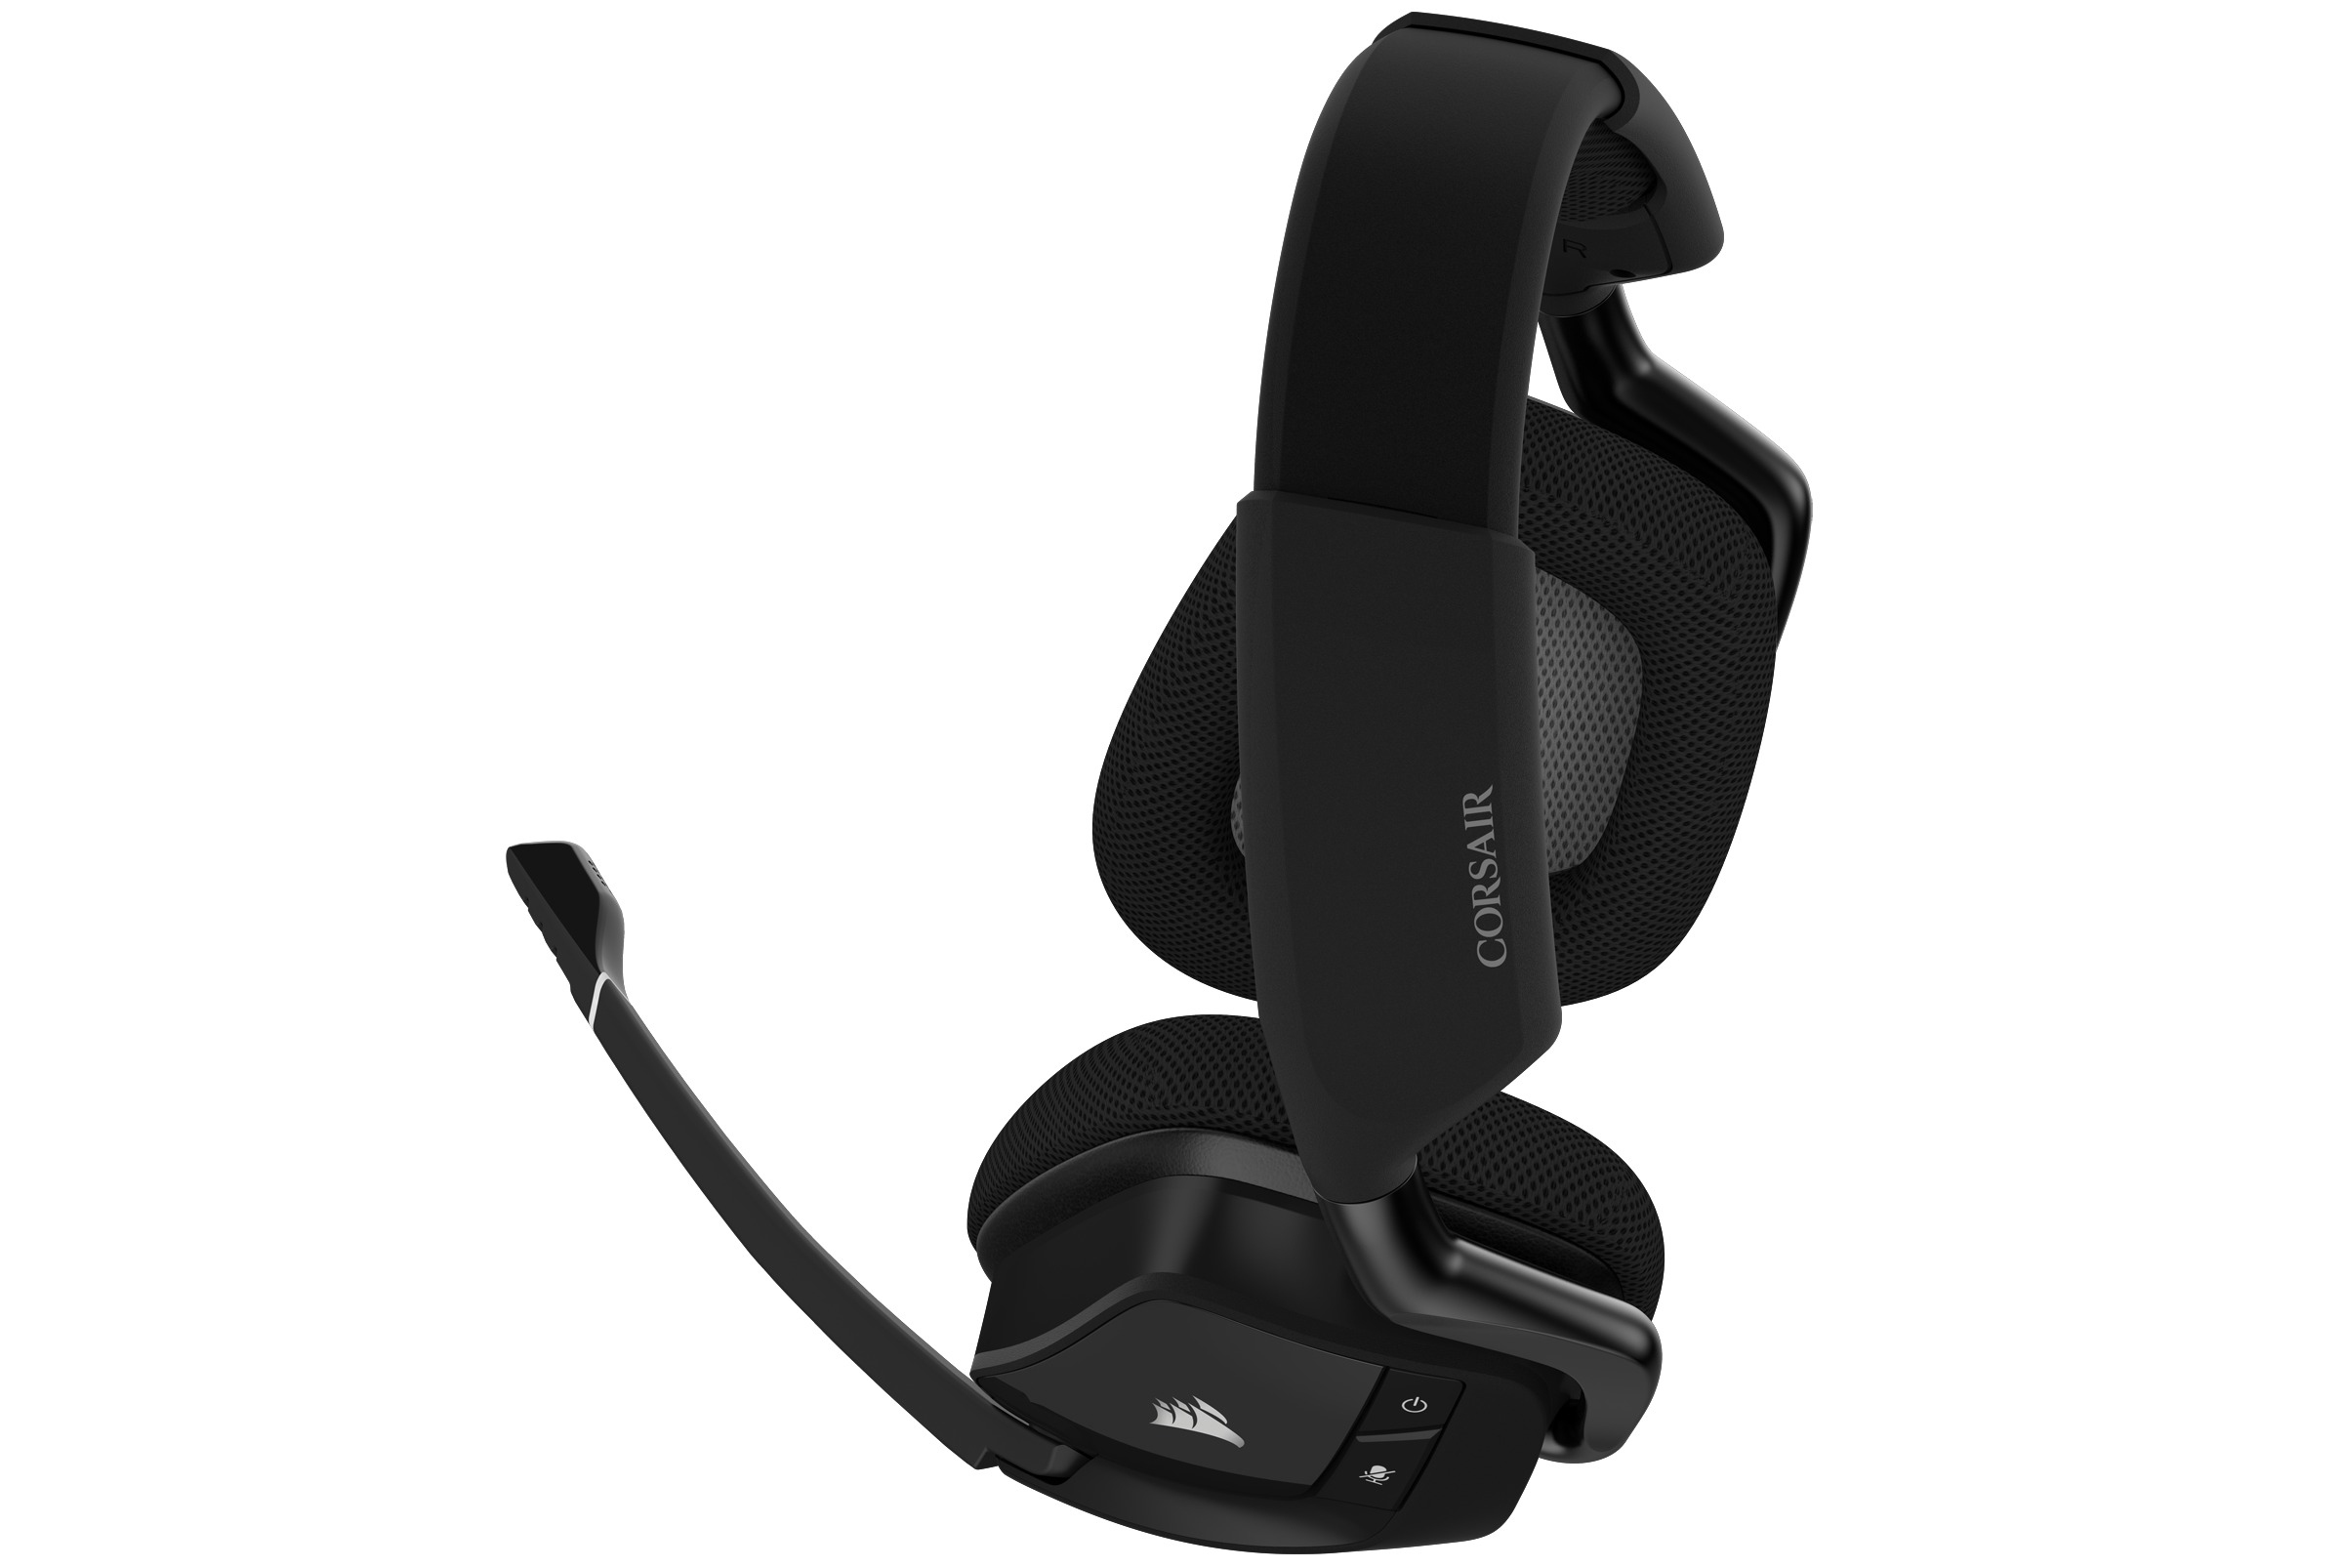 Gaming CA-9011201, CORSAIR Carbon Headset Over-ear